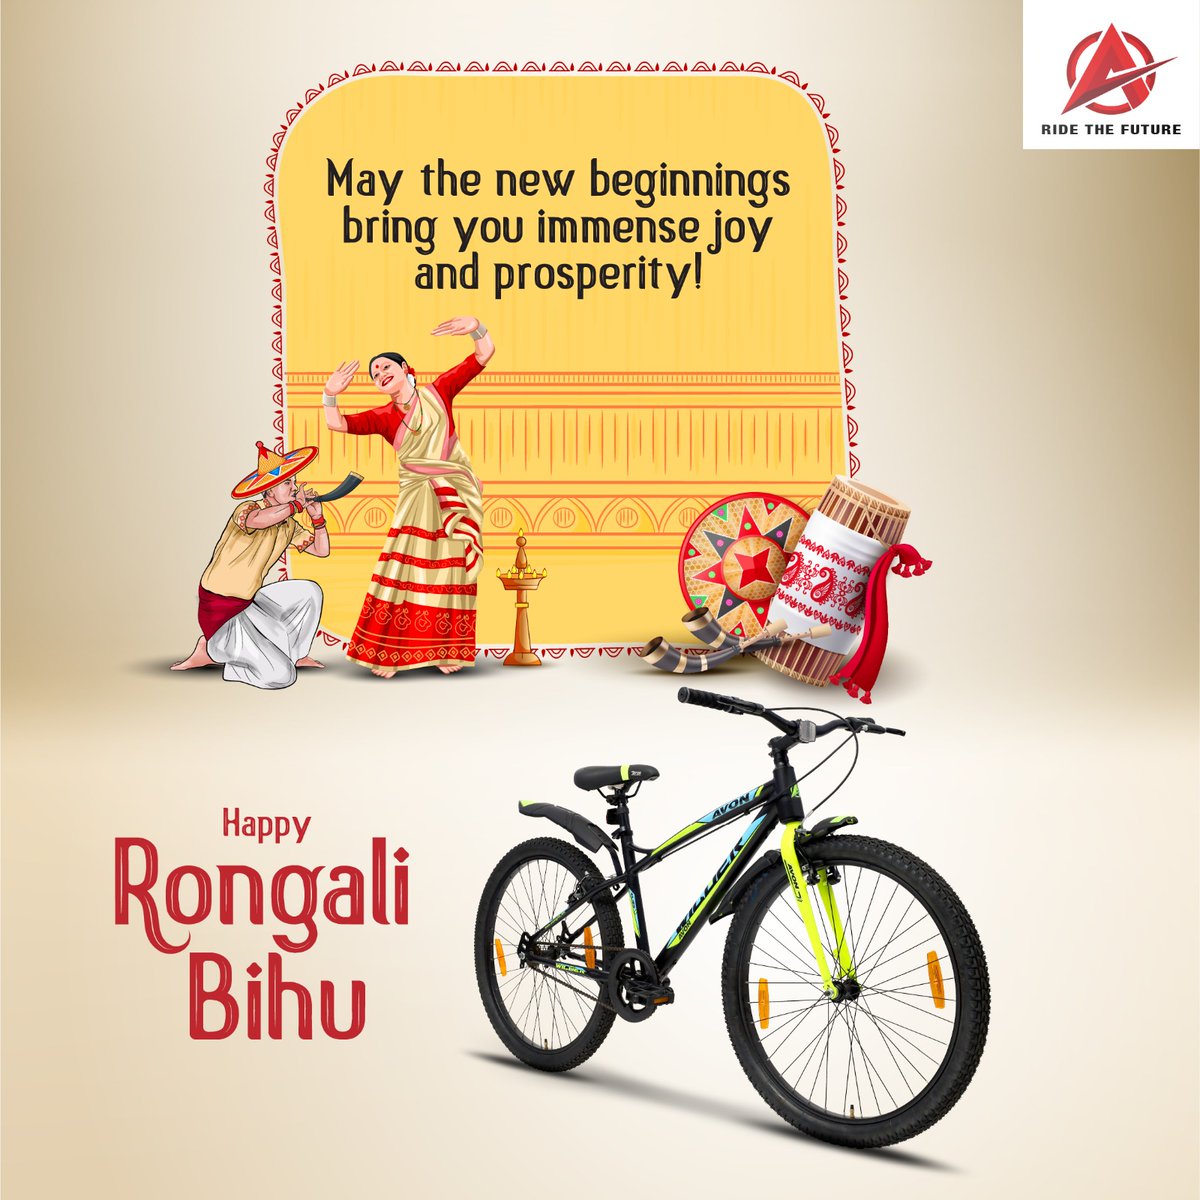 May this auspicious occasion mark the start of new journeys filled with joy and abundance. Happy Rongali Bihu, Assam! #NewBeginnings #Prosperity #AvonCycle